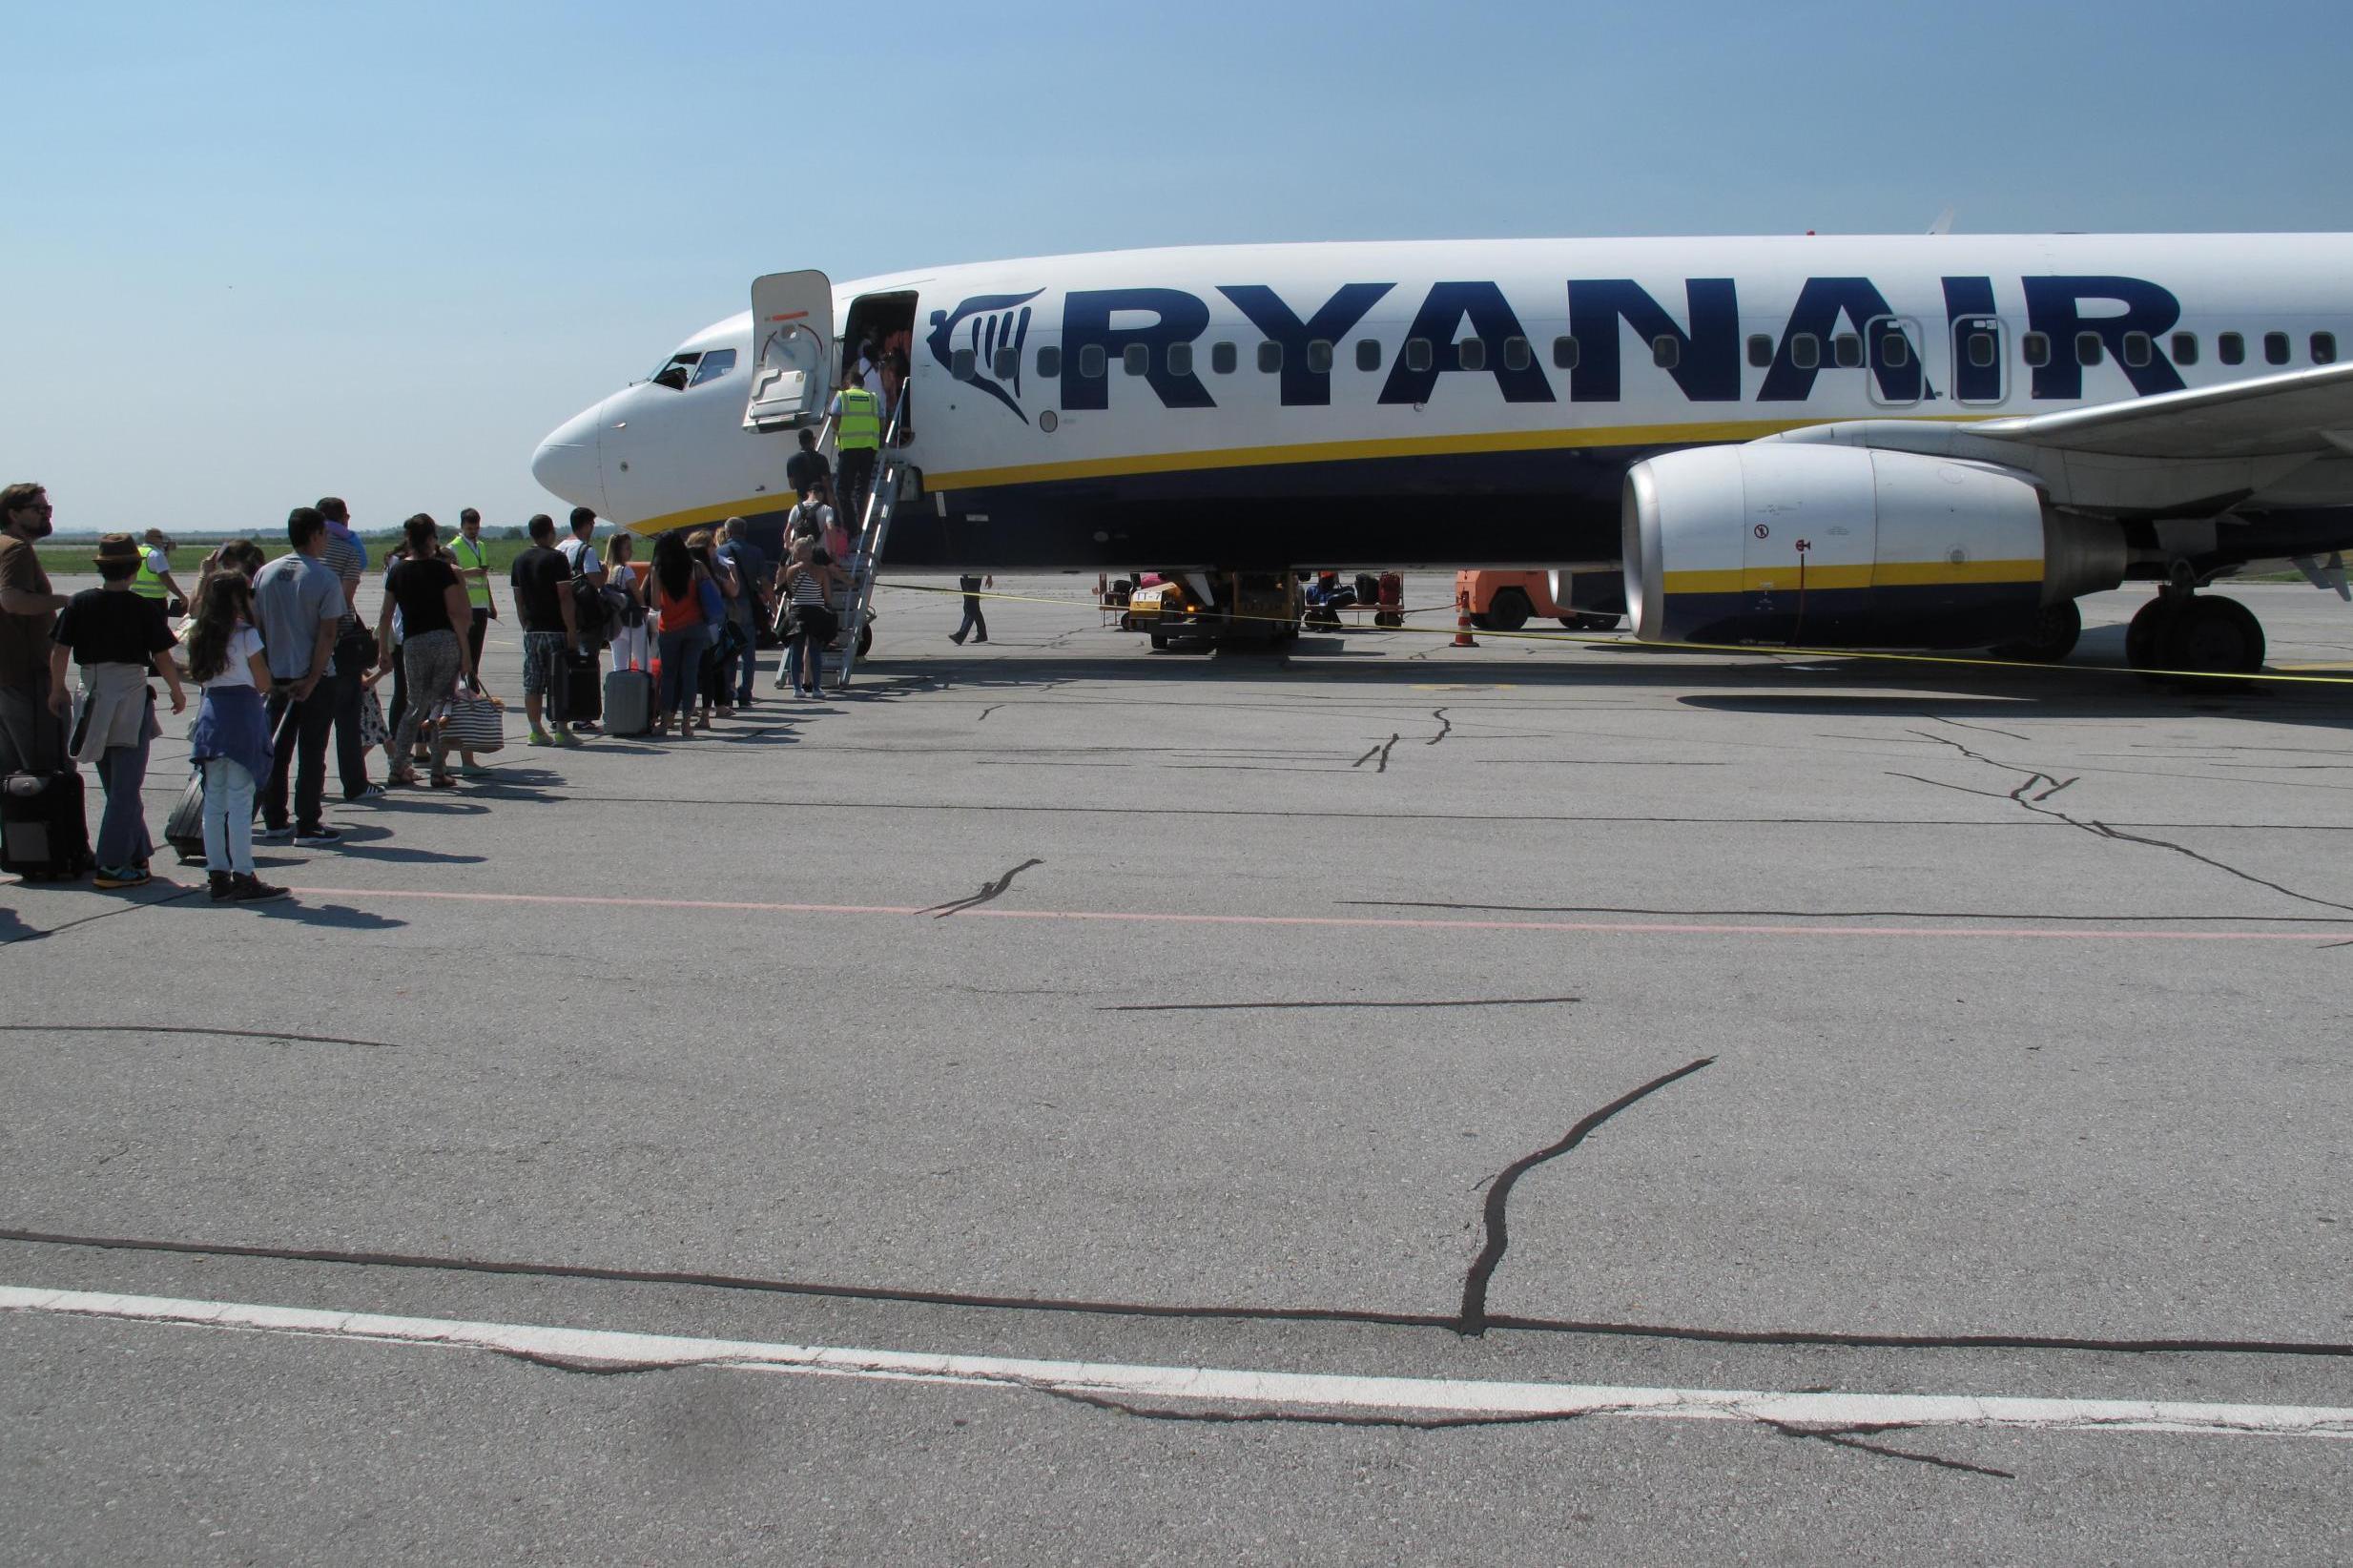 Ryanair’s on-time performance has declined from 90 per cent to under 80 per cent over the past two weeks